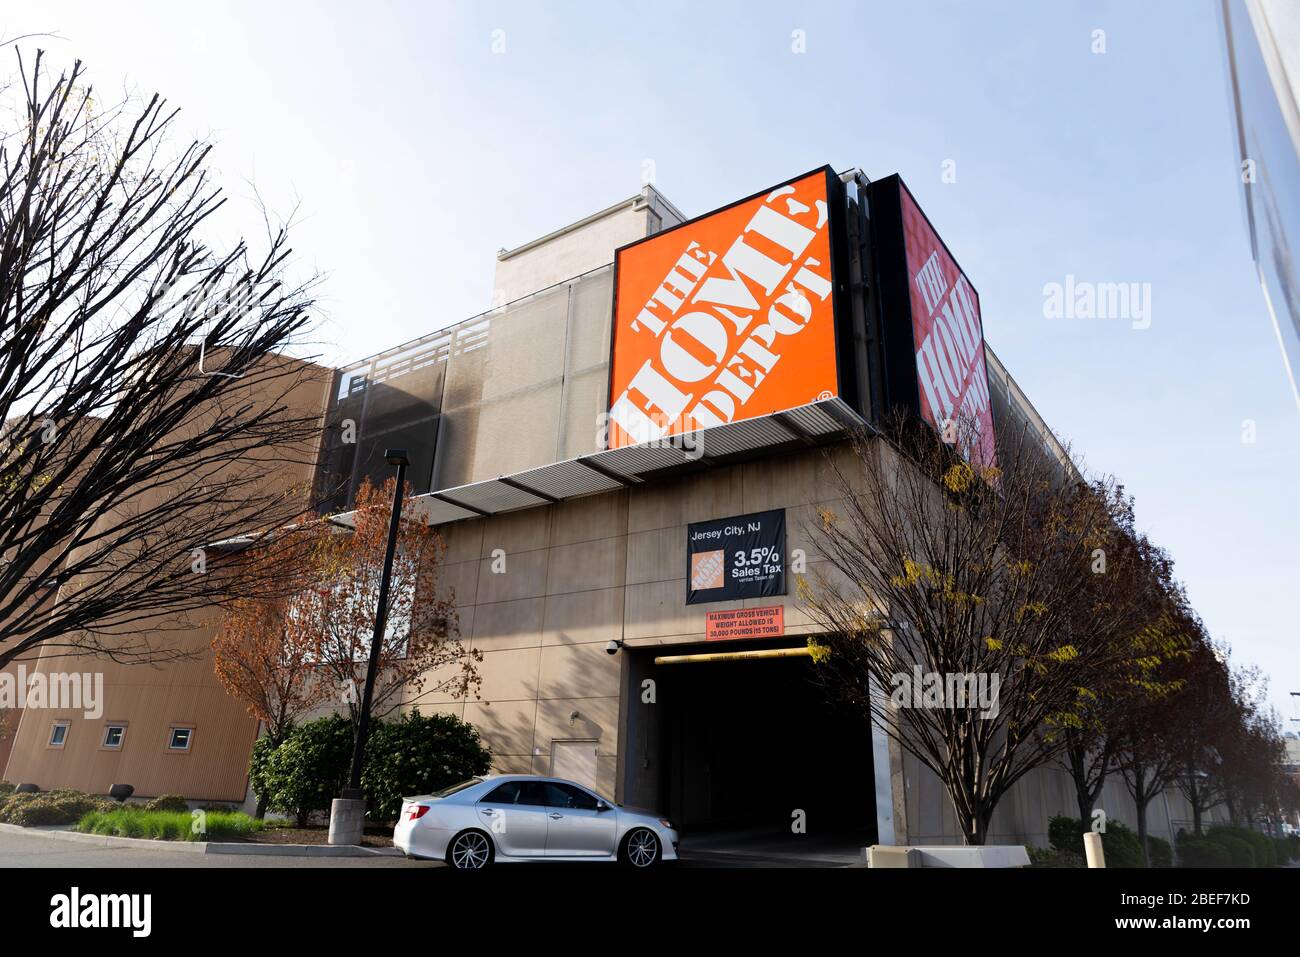 Jersey City, NJ - April 13 2020: Home Depot an essential business during the Coronavirus outbreak is open. 3.5% Urban economic zone sales tax  Stock Photo